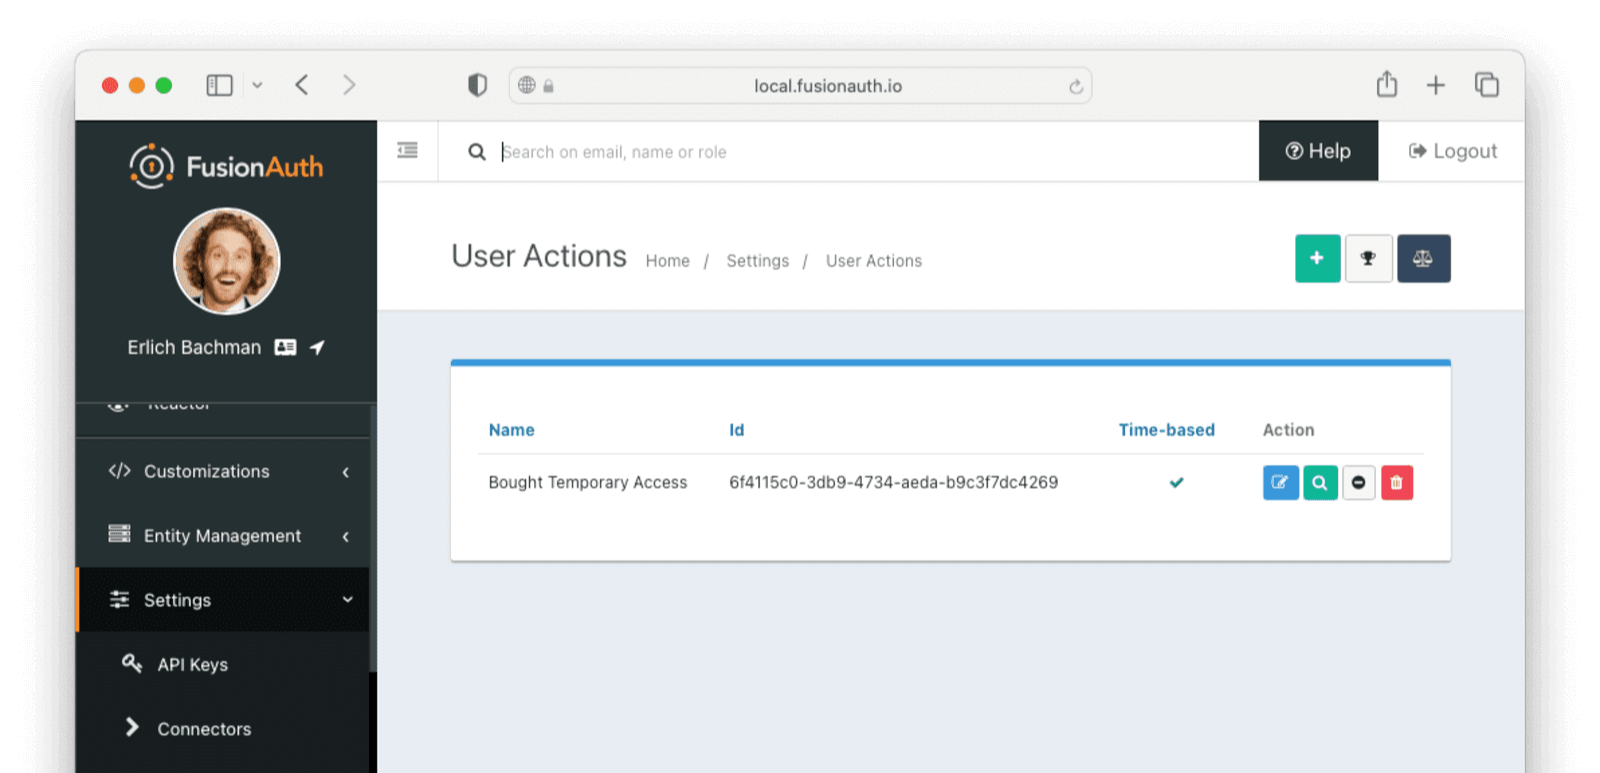 Verify that the User Action was created by checking in the admin portal.